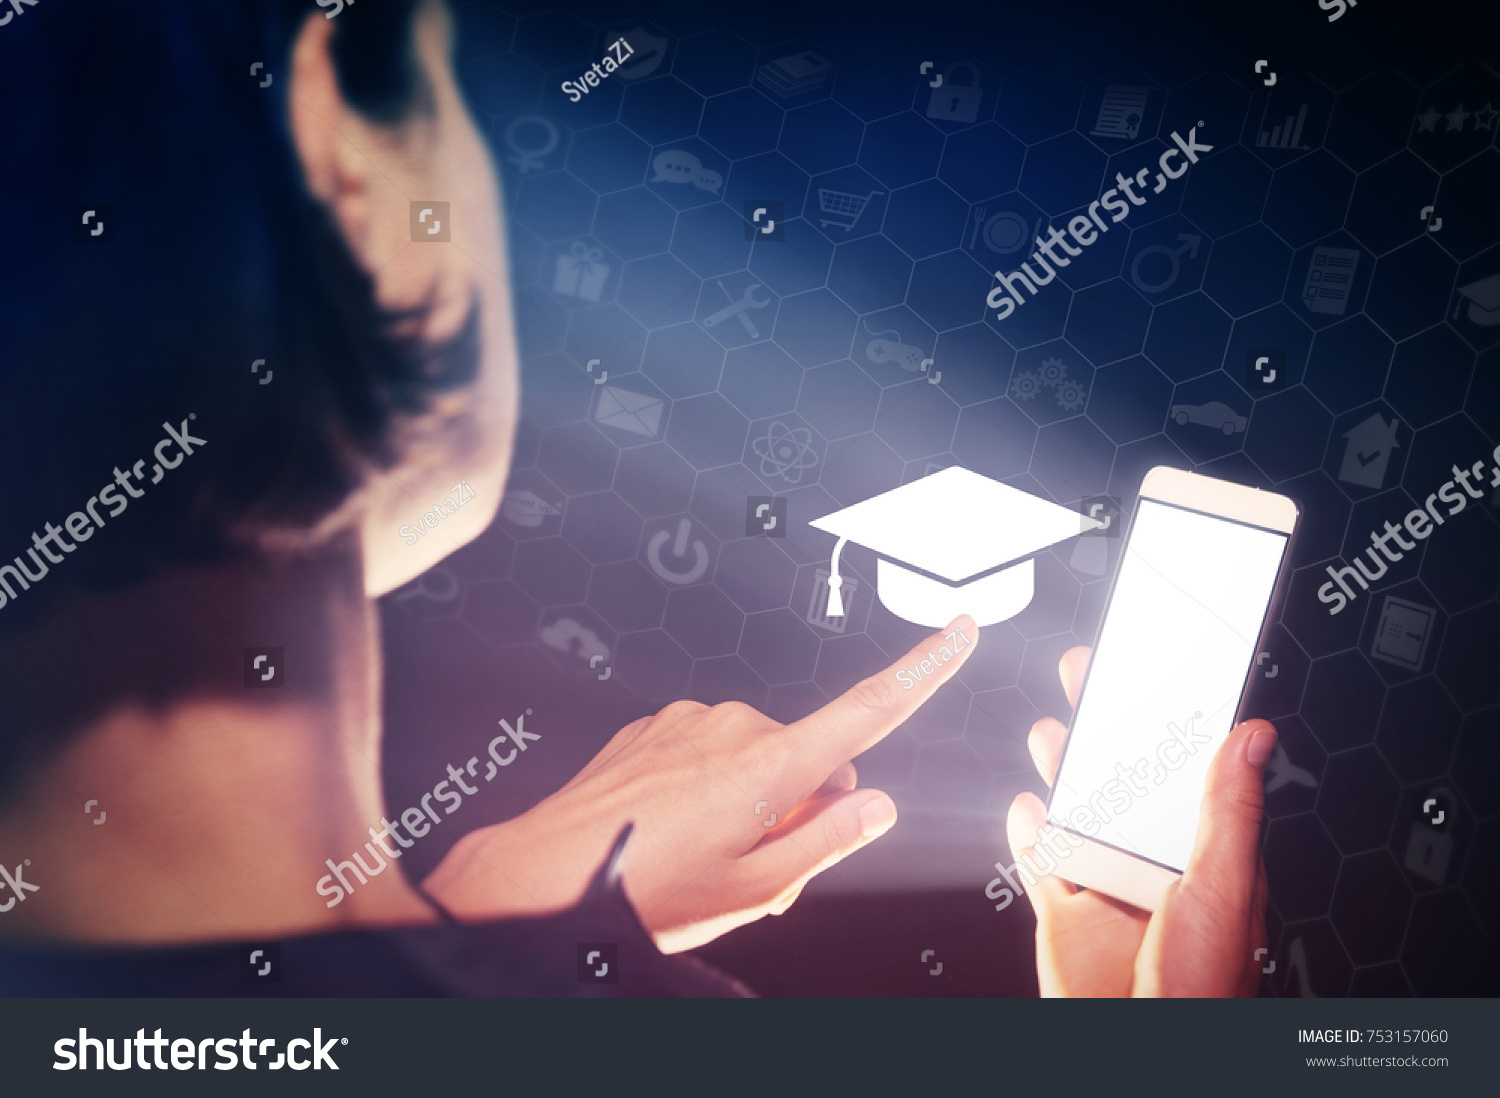 Image of a girl with a smartphone in hands. She presses on the graduation hat cap icon. Concept of online education, choose of career. #753157060